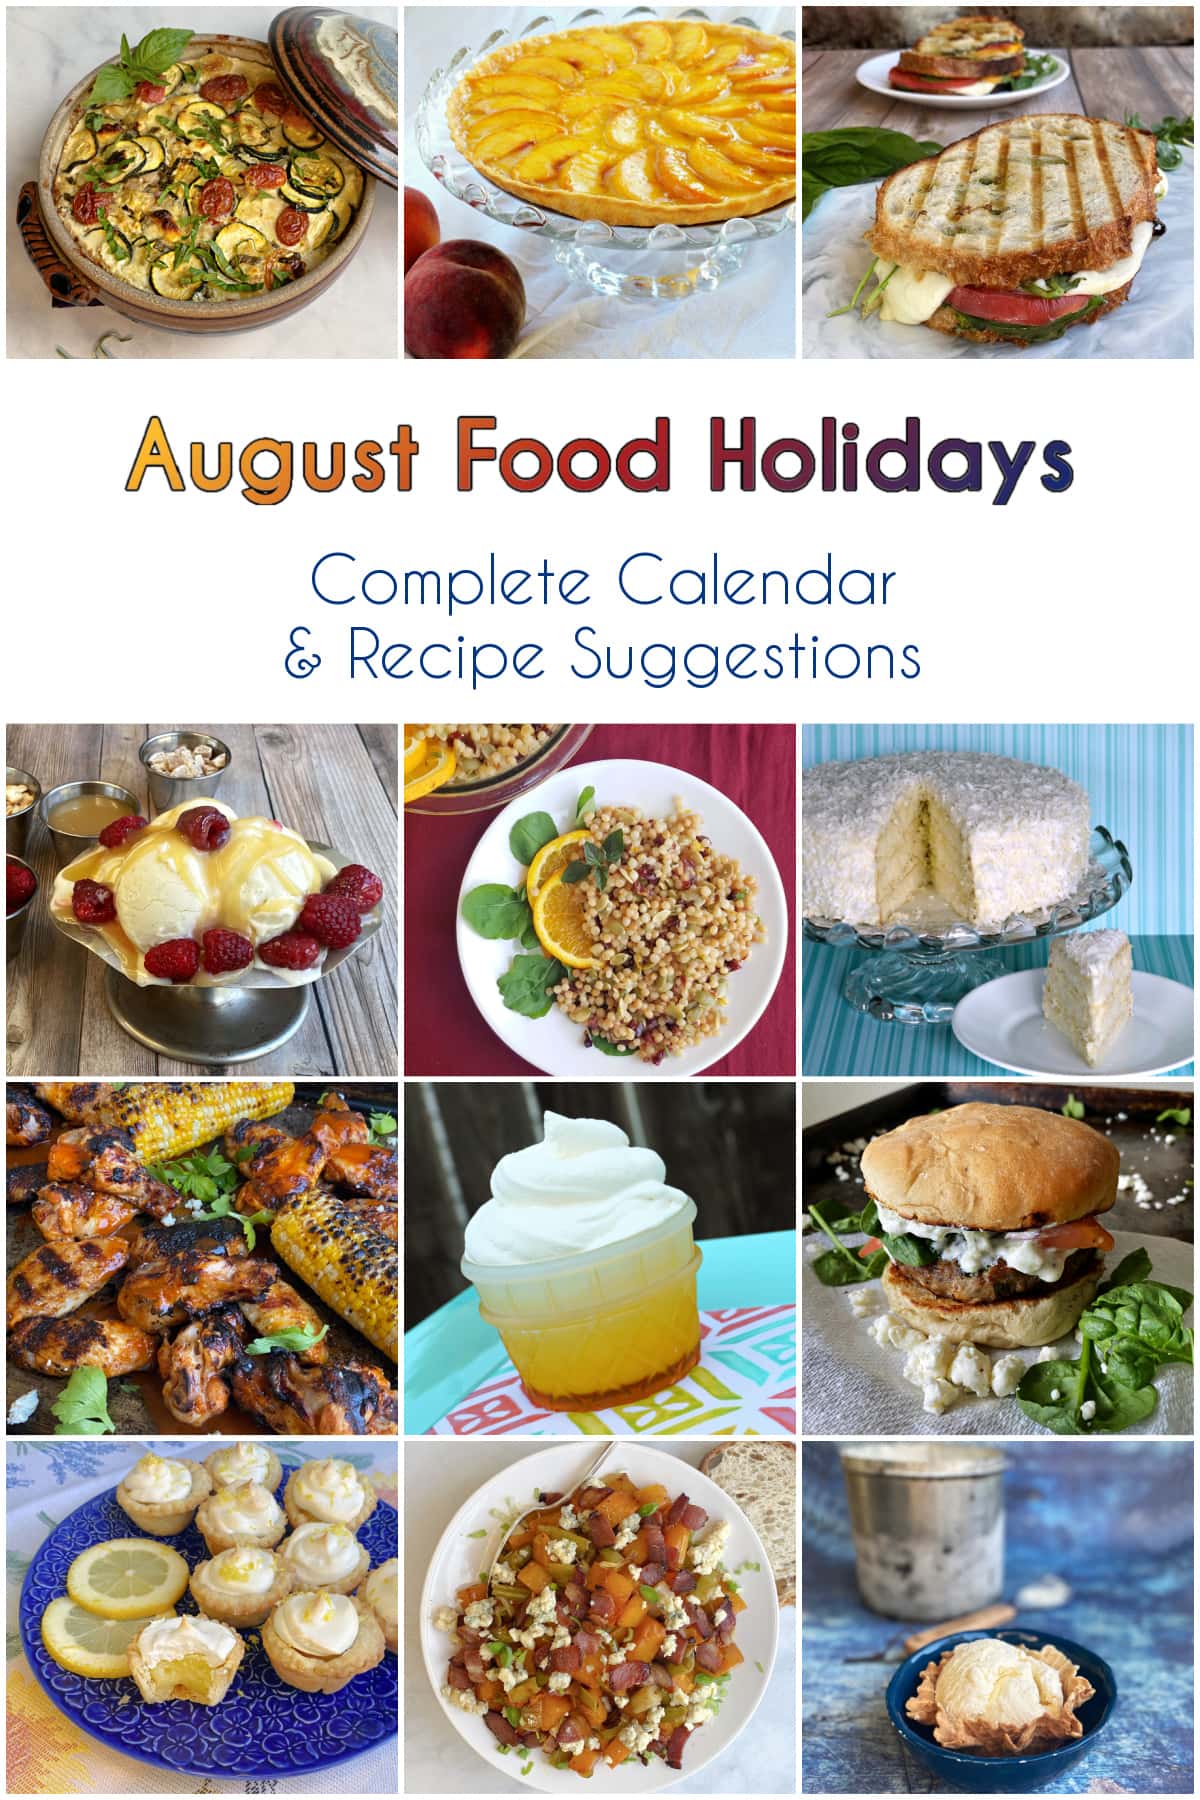 12-panel collage showing images of foods from recipes with text centered between reading "August Food Holidays, Calendar & Recipes."